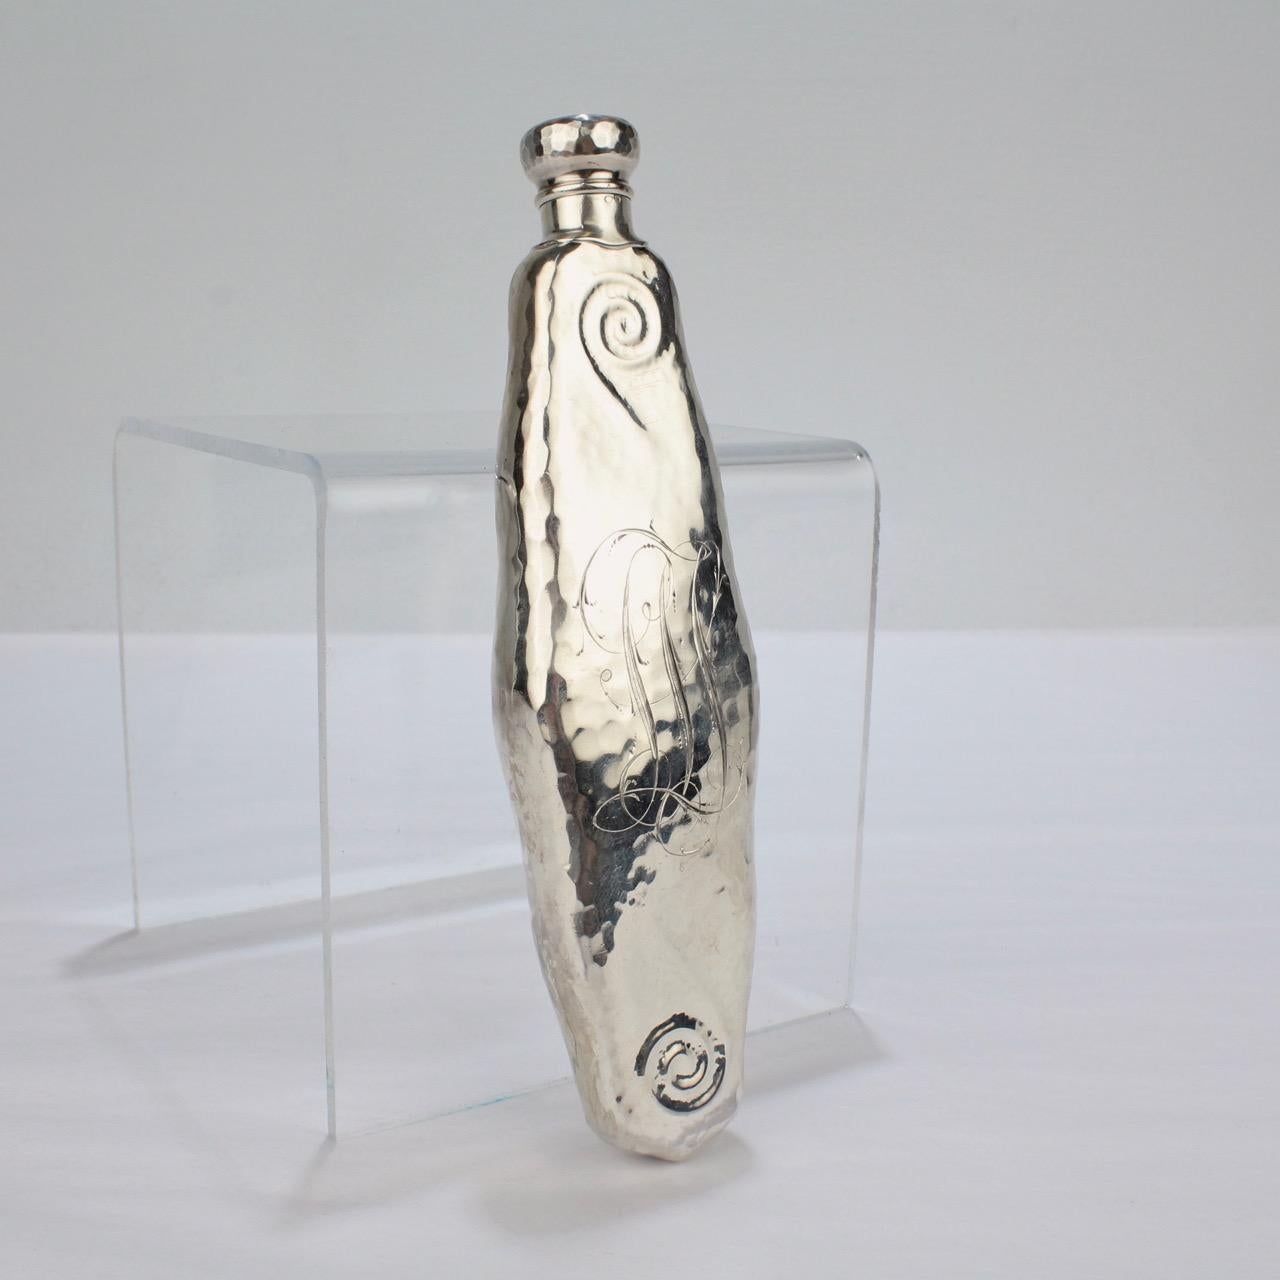 A wonderful, antique sterling silver Art Nouveau flask by Whiting.

With a hand-hammered finish, scalloped sides, swirl decoration to the tops and bottoms, and an etched monogram to the one side.

The base is marked for Whiting, Sterling and with a